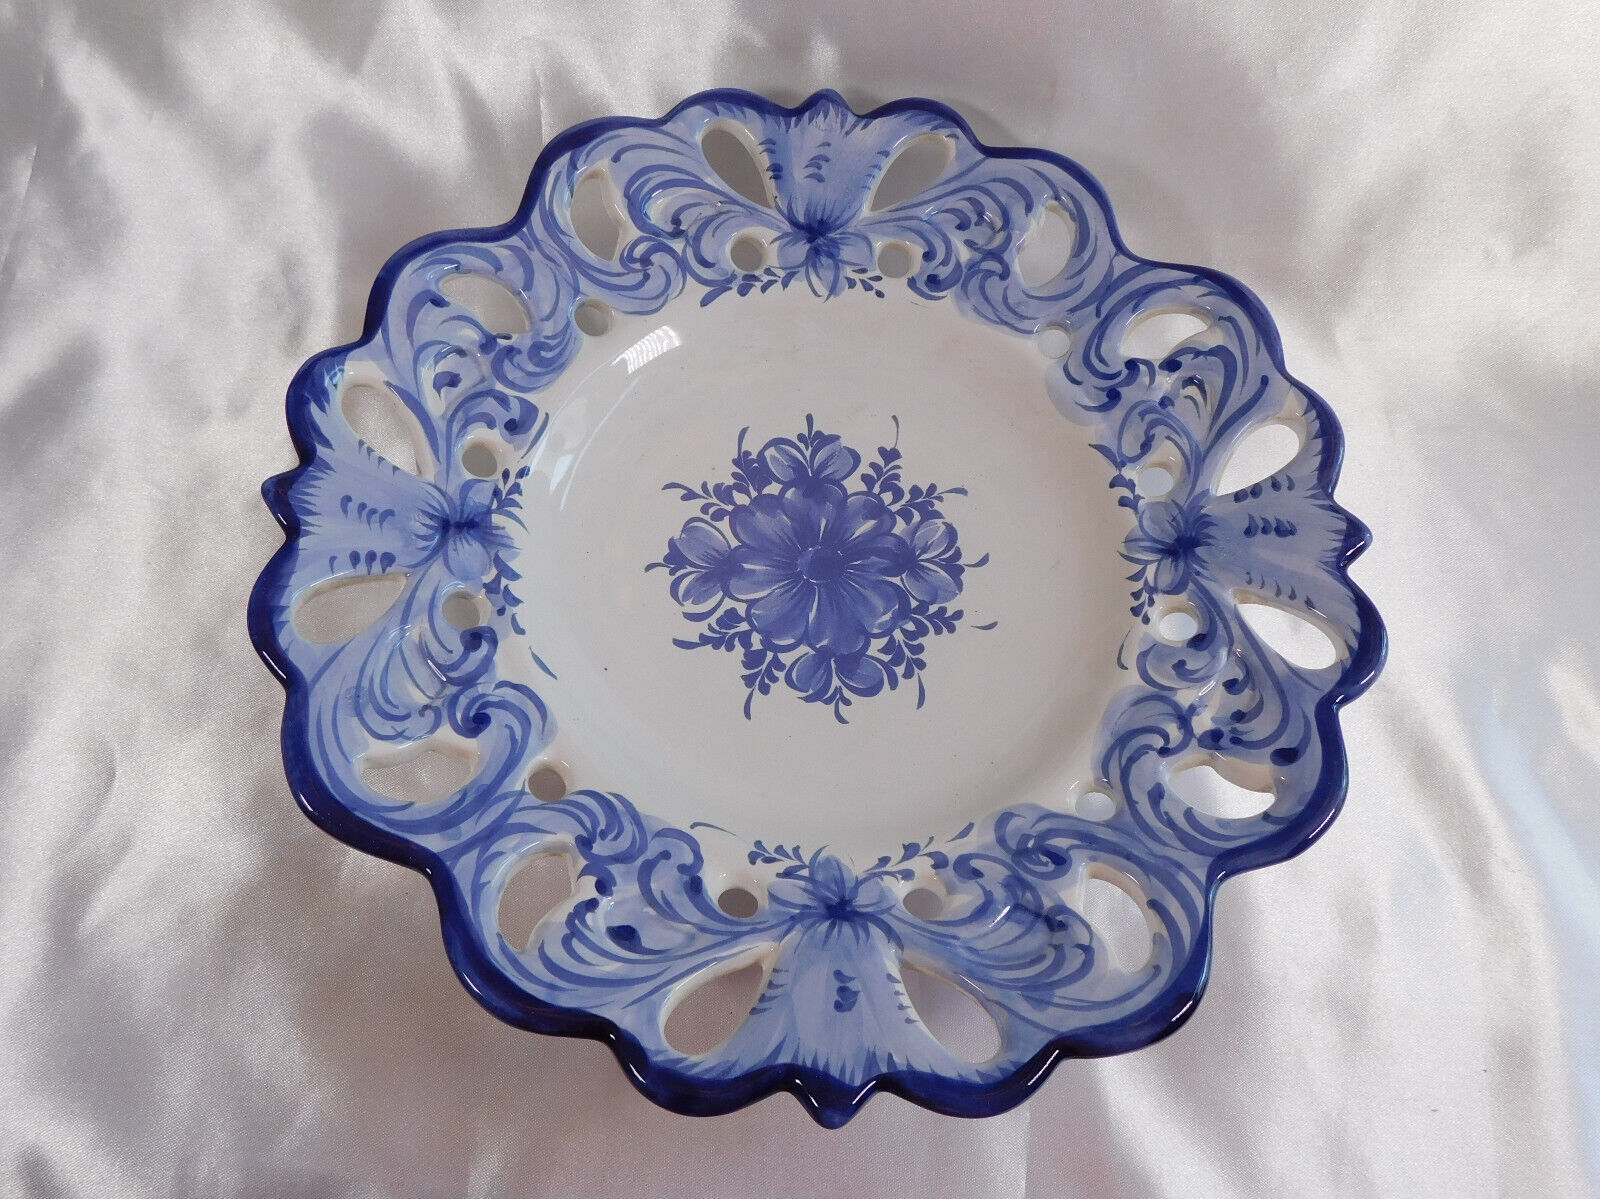 Primary image for Blue and White Floral Plate from Portugal # 23286